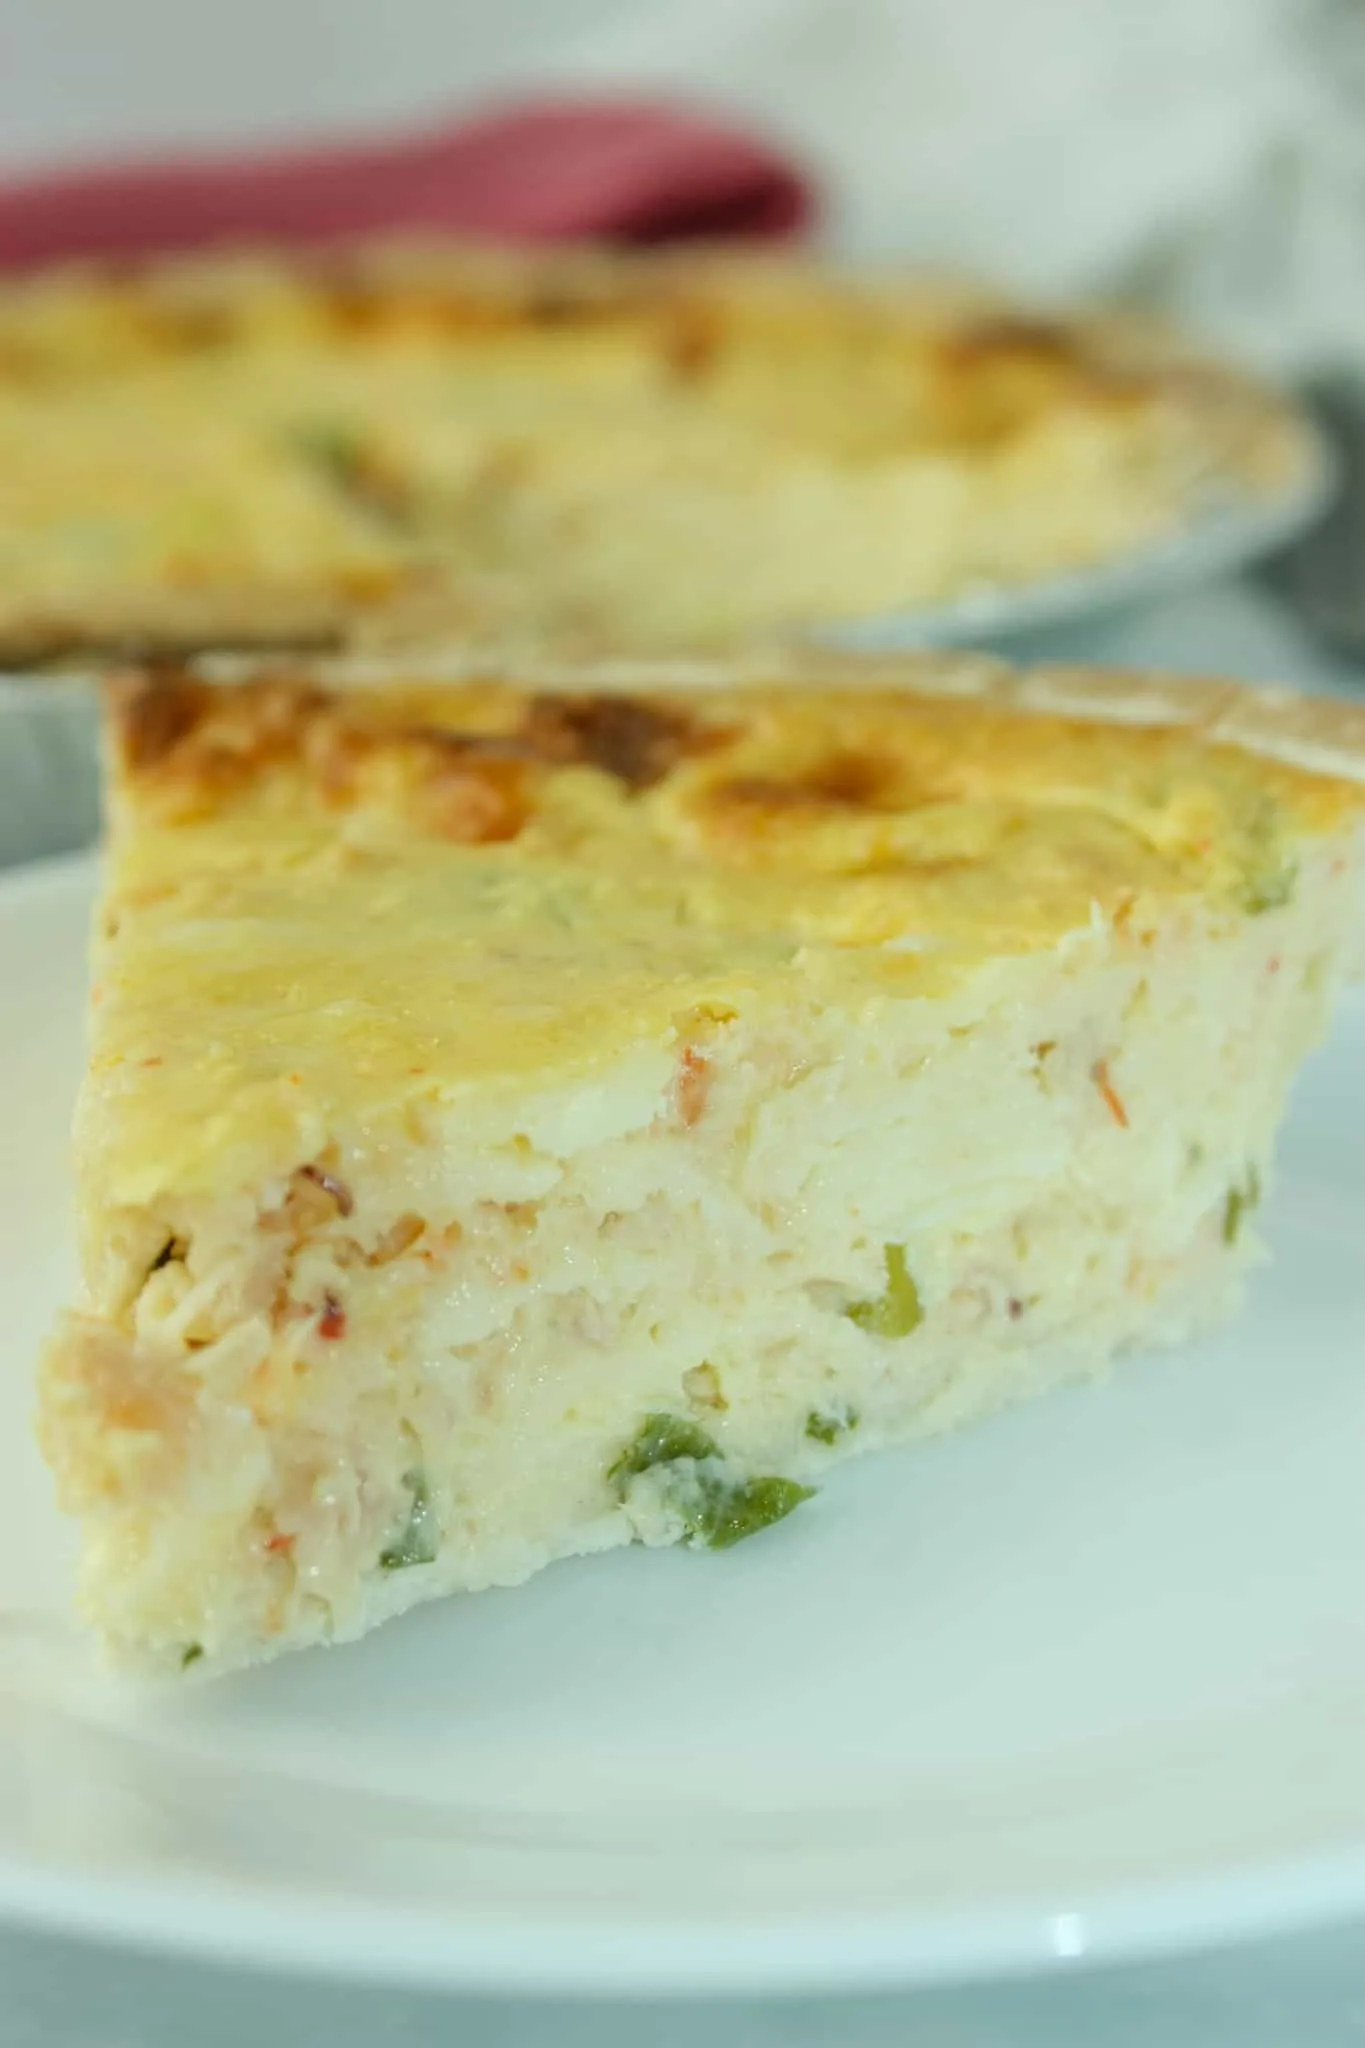 If you are looking for an easy quiche recipe, for your next brunch or light dinner, this is the perfect recipe for you!  This tasty Seafood Quiche is a great variation to serve up any time and make it gluten free with your choice of pie shell.